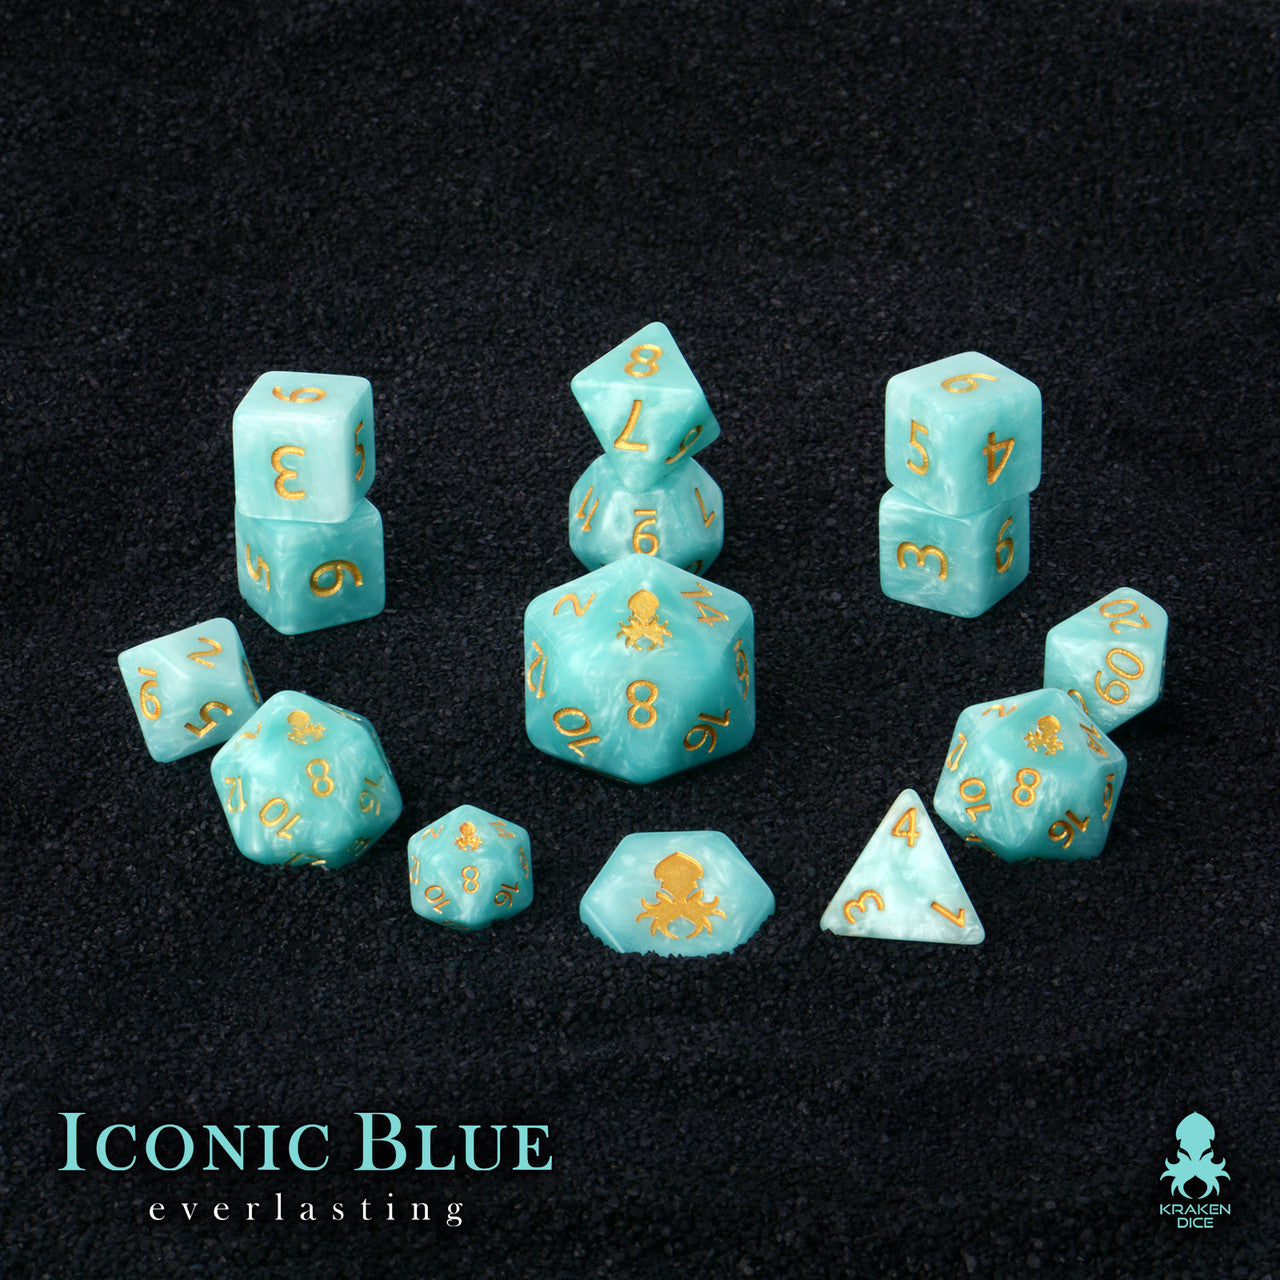 Iconic Blue: Everlasting 14pc Dice Set With Gold Ink